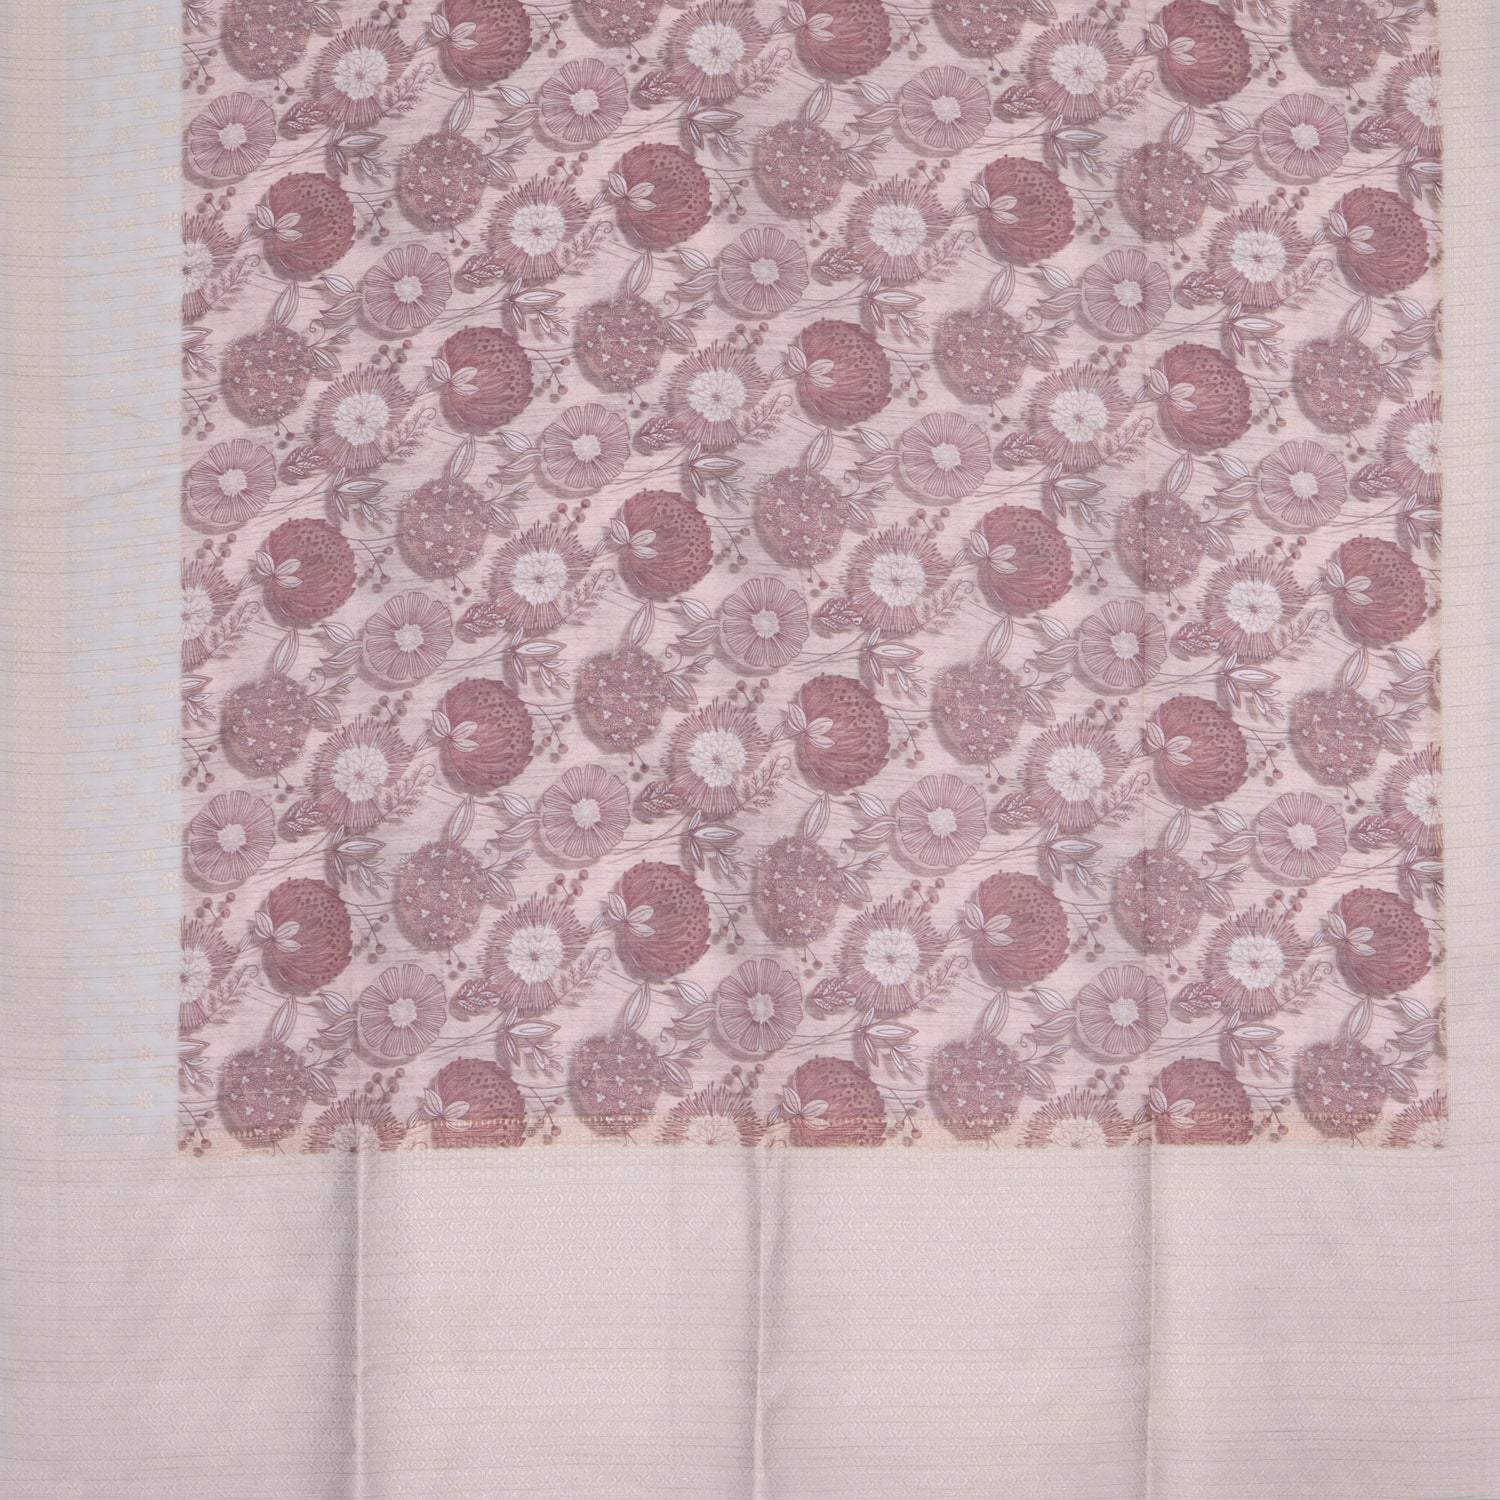 Ivory Cotton Printed Saree With Floral Pattern - Singhania's